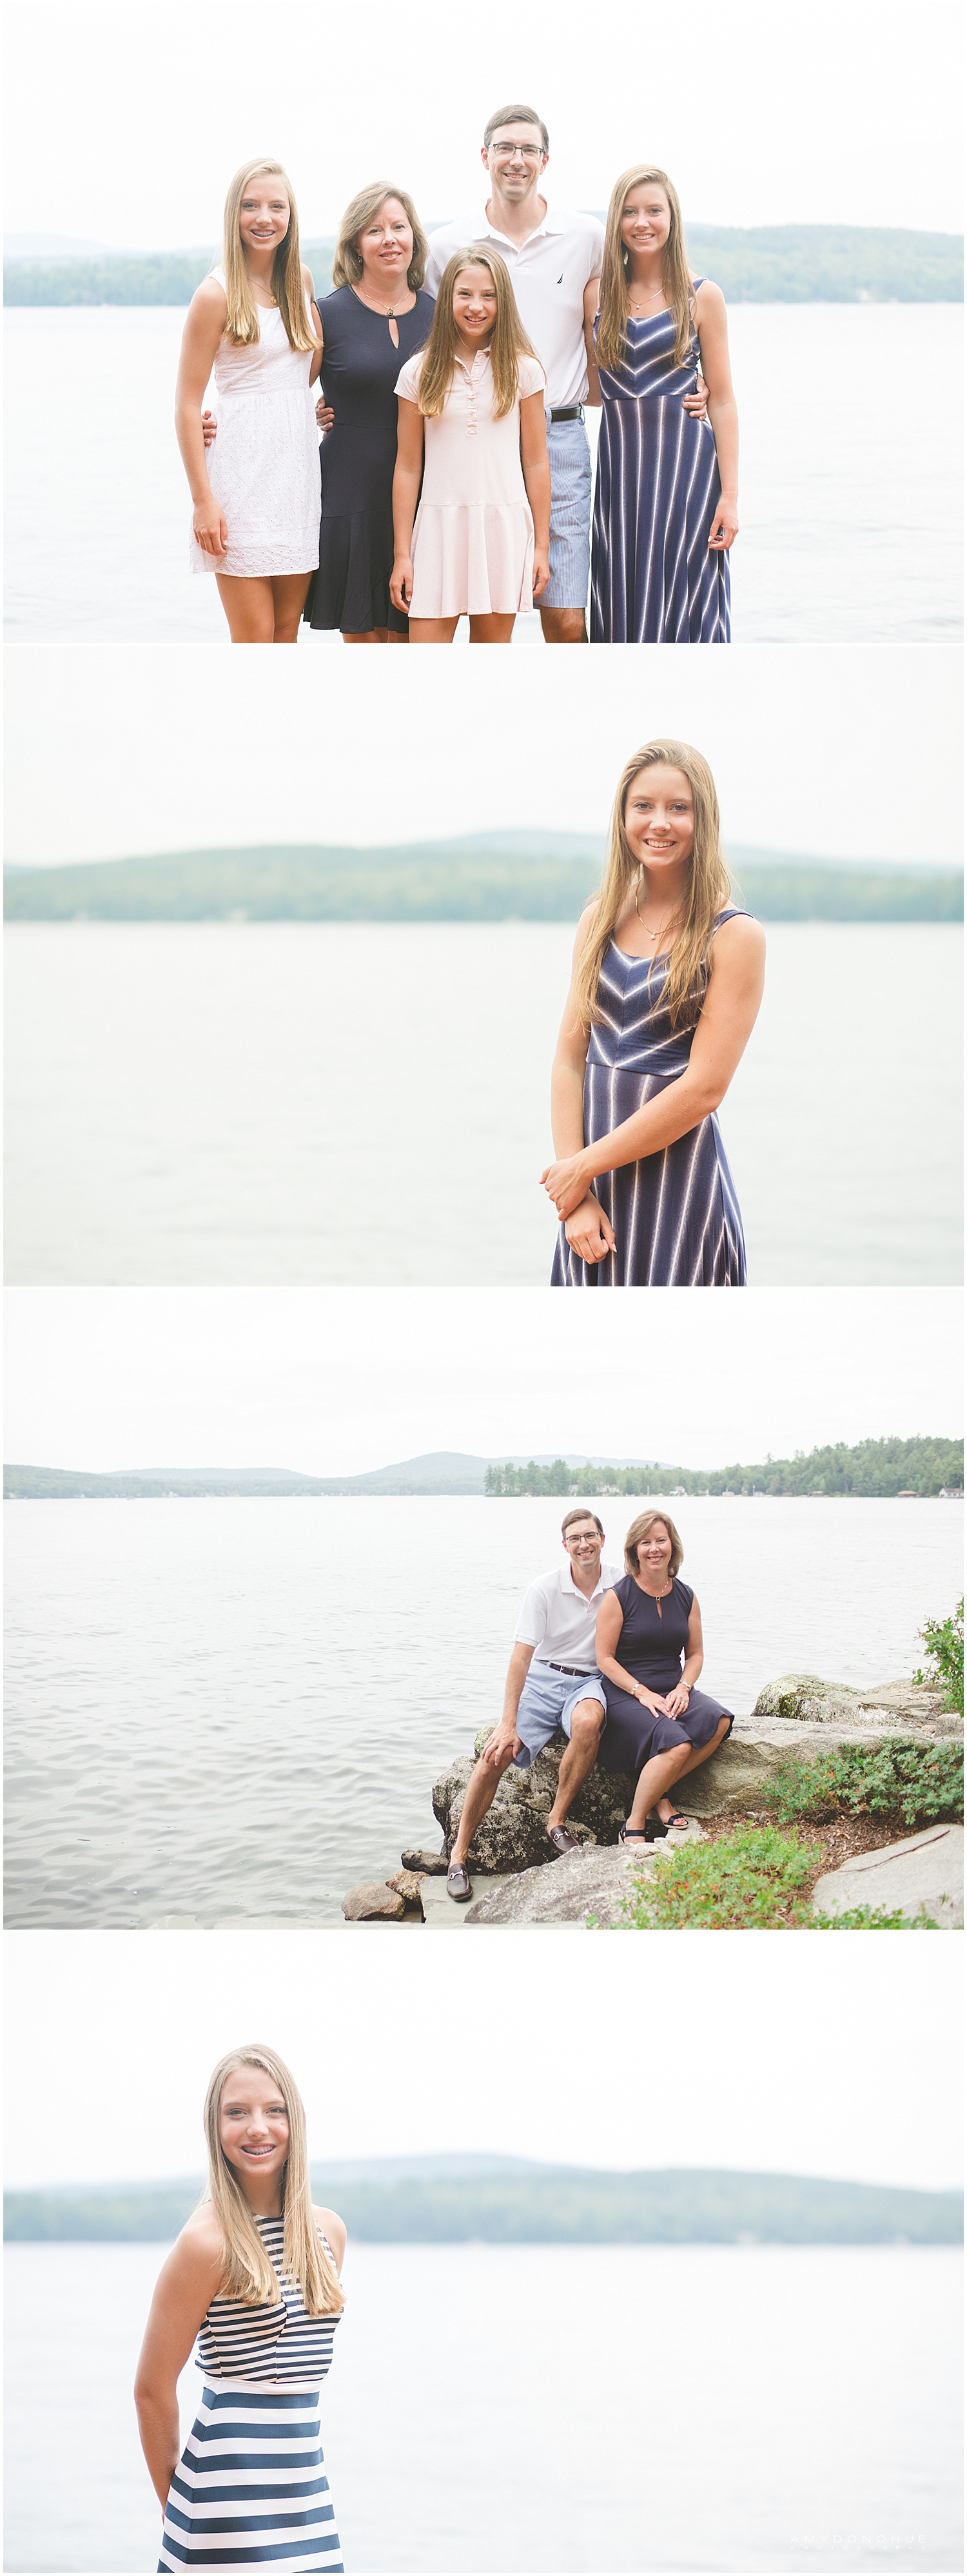 Vermont Family Photographer | Amy Donohue Photography ©